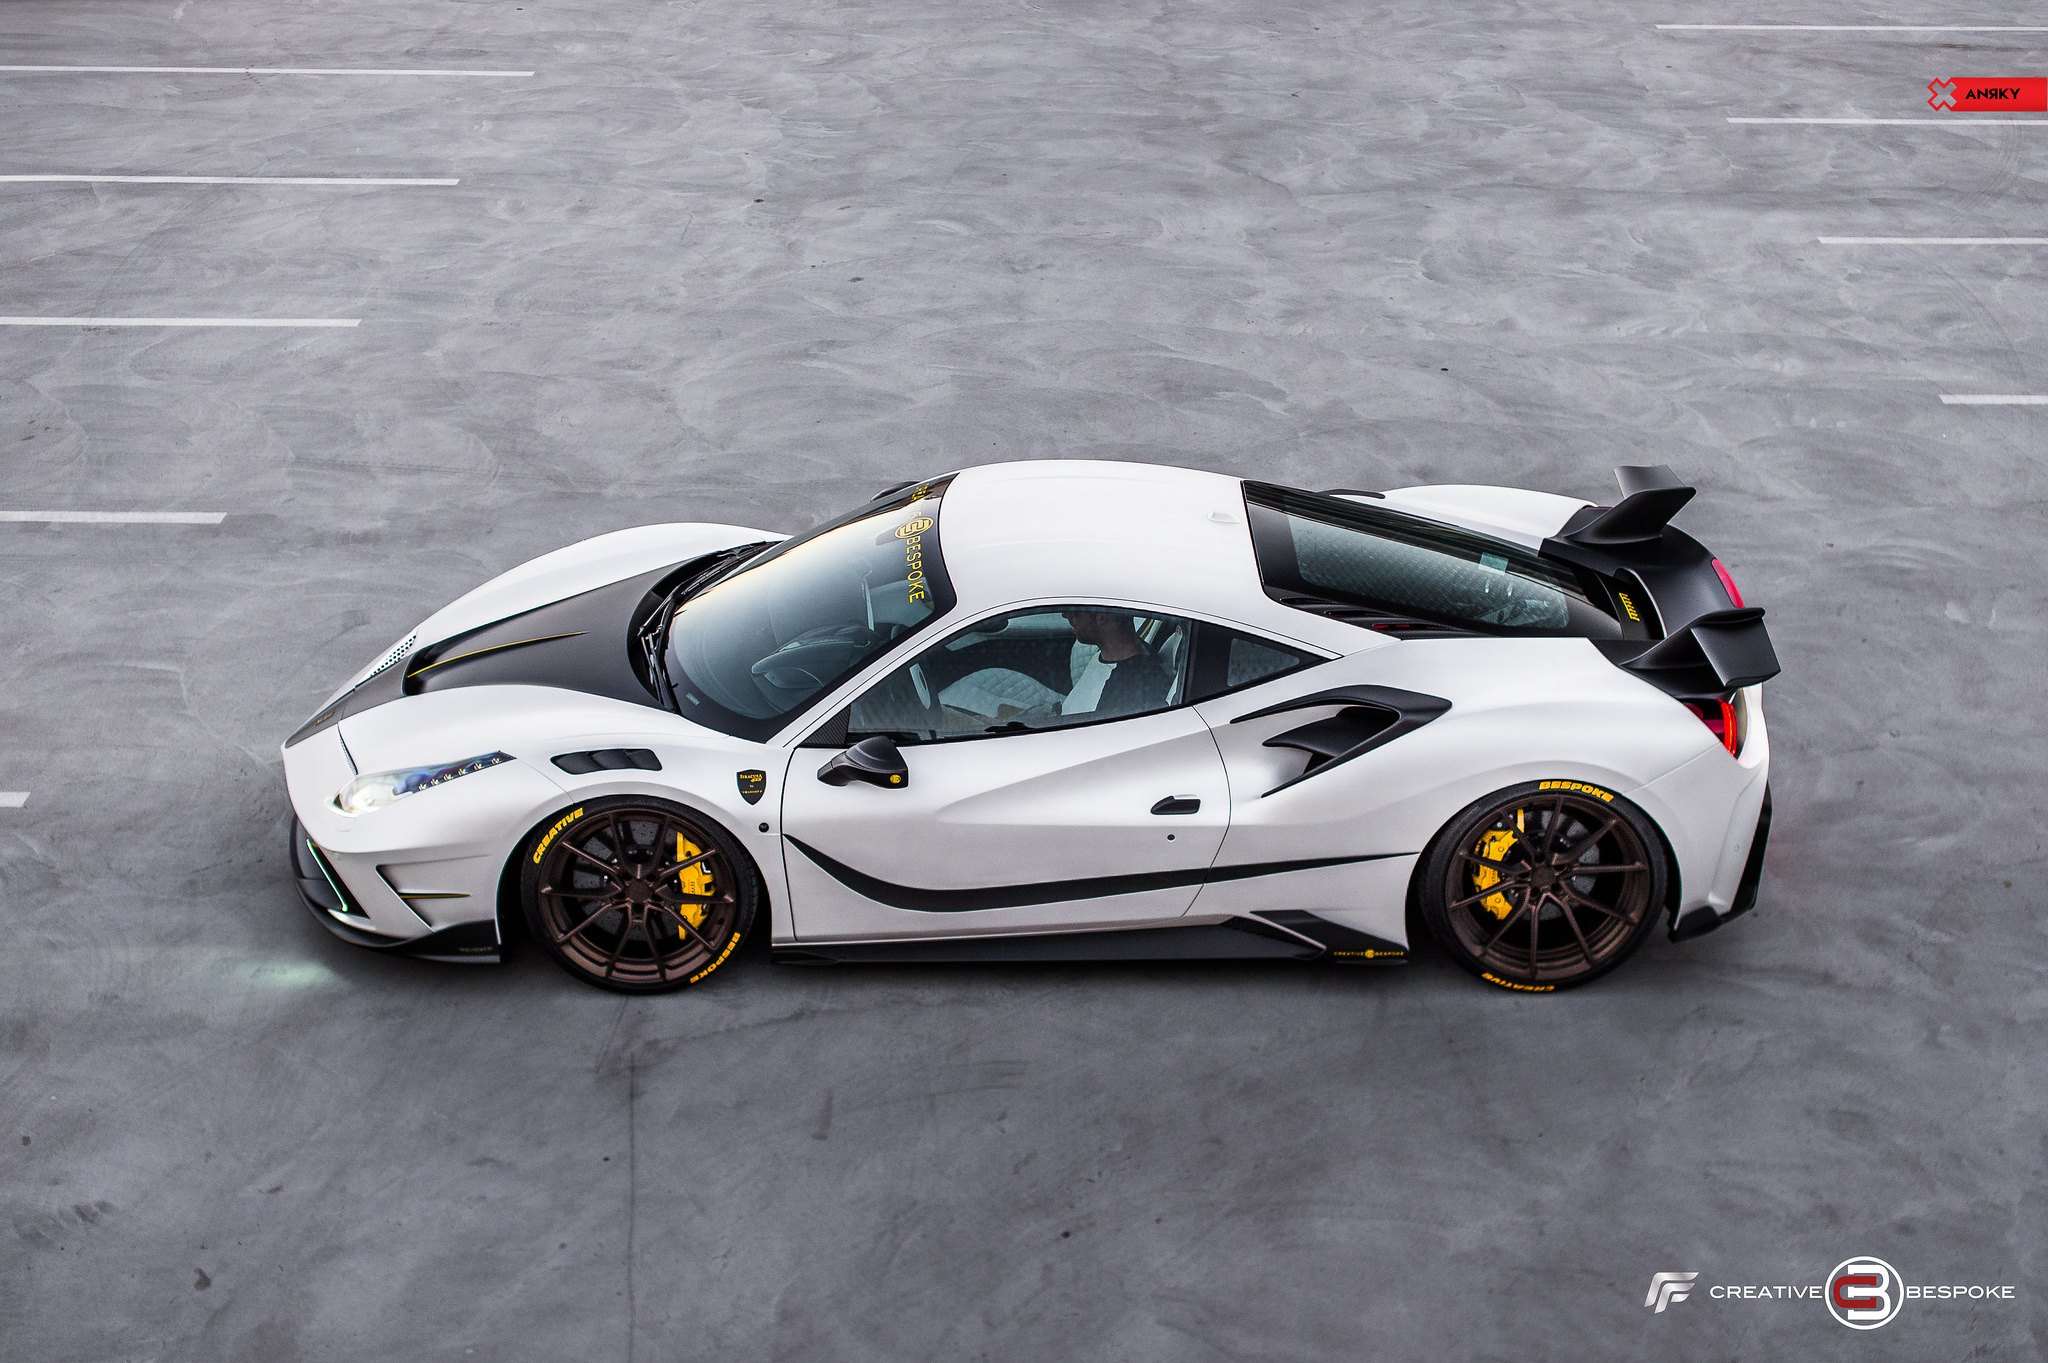 ANRKY Rims with Yellow Brakes on White Ferrari 488 - Photo by ANRKY Wheels